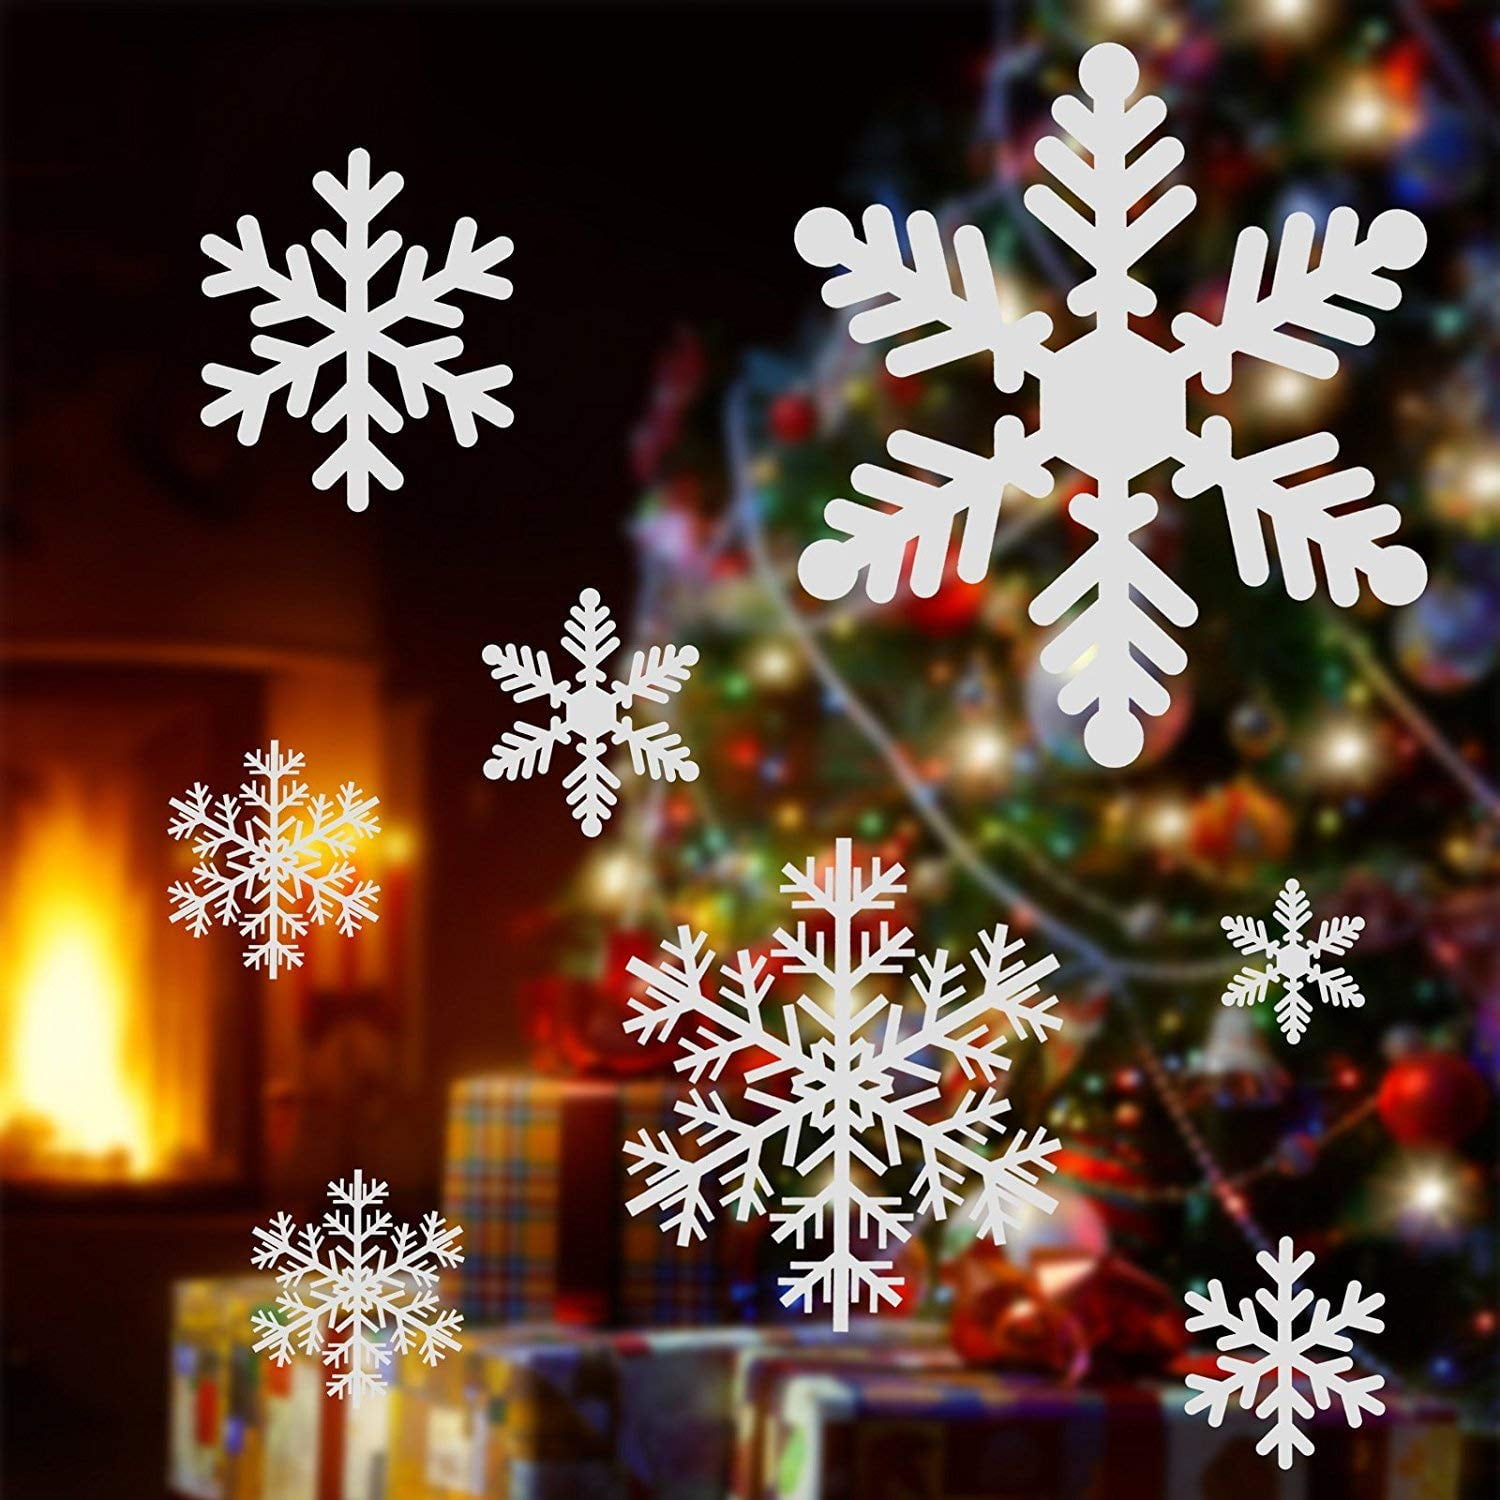 Snowflakes Window Clings Xmas Sticker Christmas Party Decor For Home/Shop Decor 